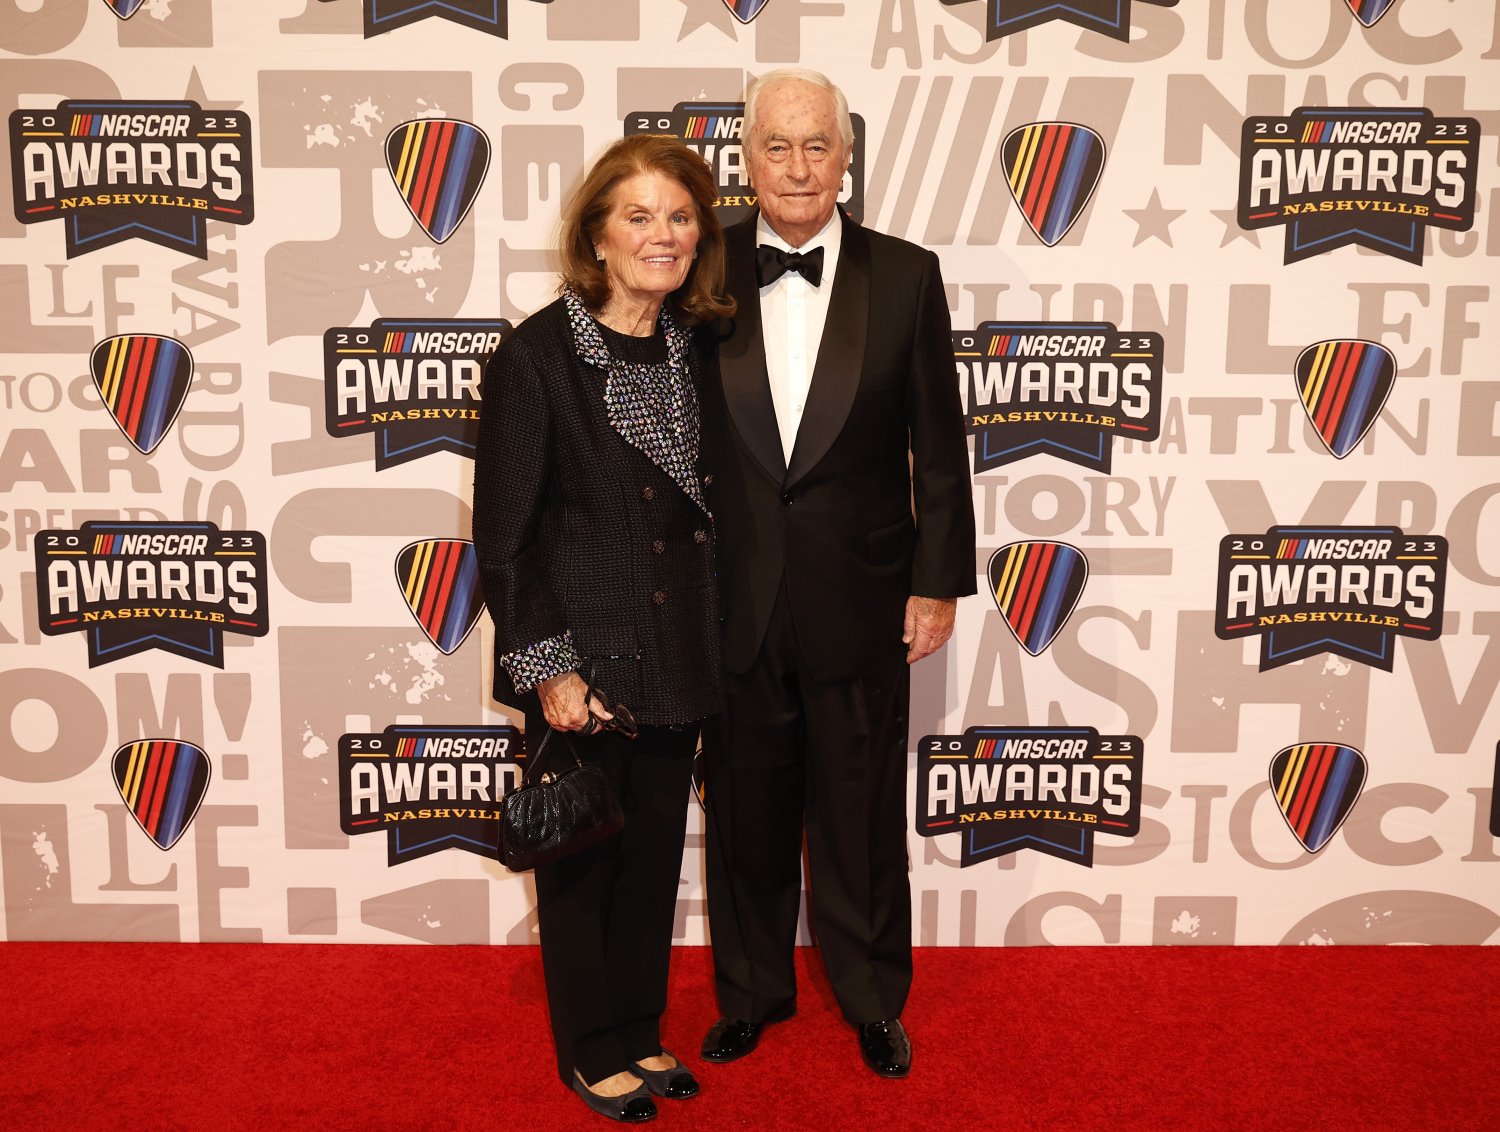 Team Penske owner, Roger Penske and wife, Kathy Penske pose for photos on the red carpet next to the Bill France NASCAR Cup Series Championship trophy prior to the NASCAR Awards and Champion Celebration at the Music City Center on November 30, 2023 in Nashville, Tennessee. (Photo by Chris Graythen/Getty Images)